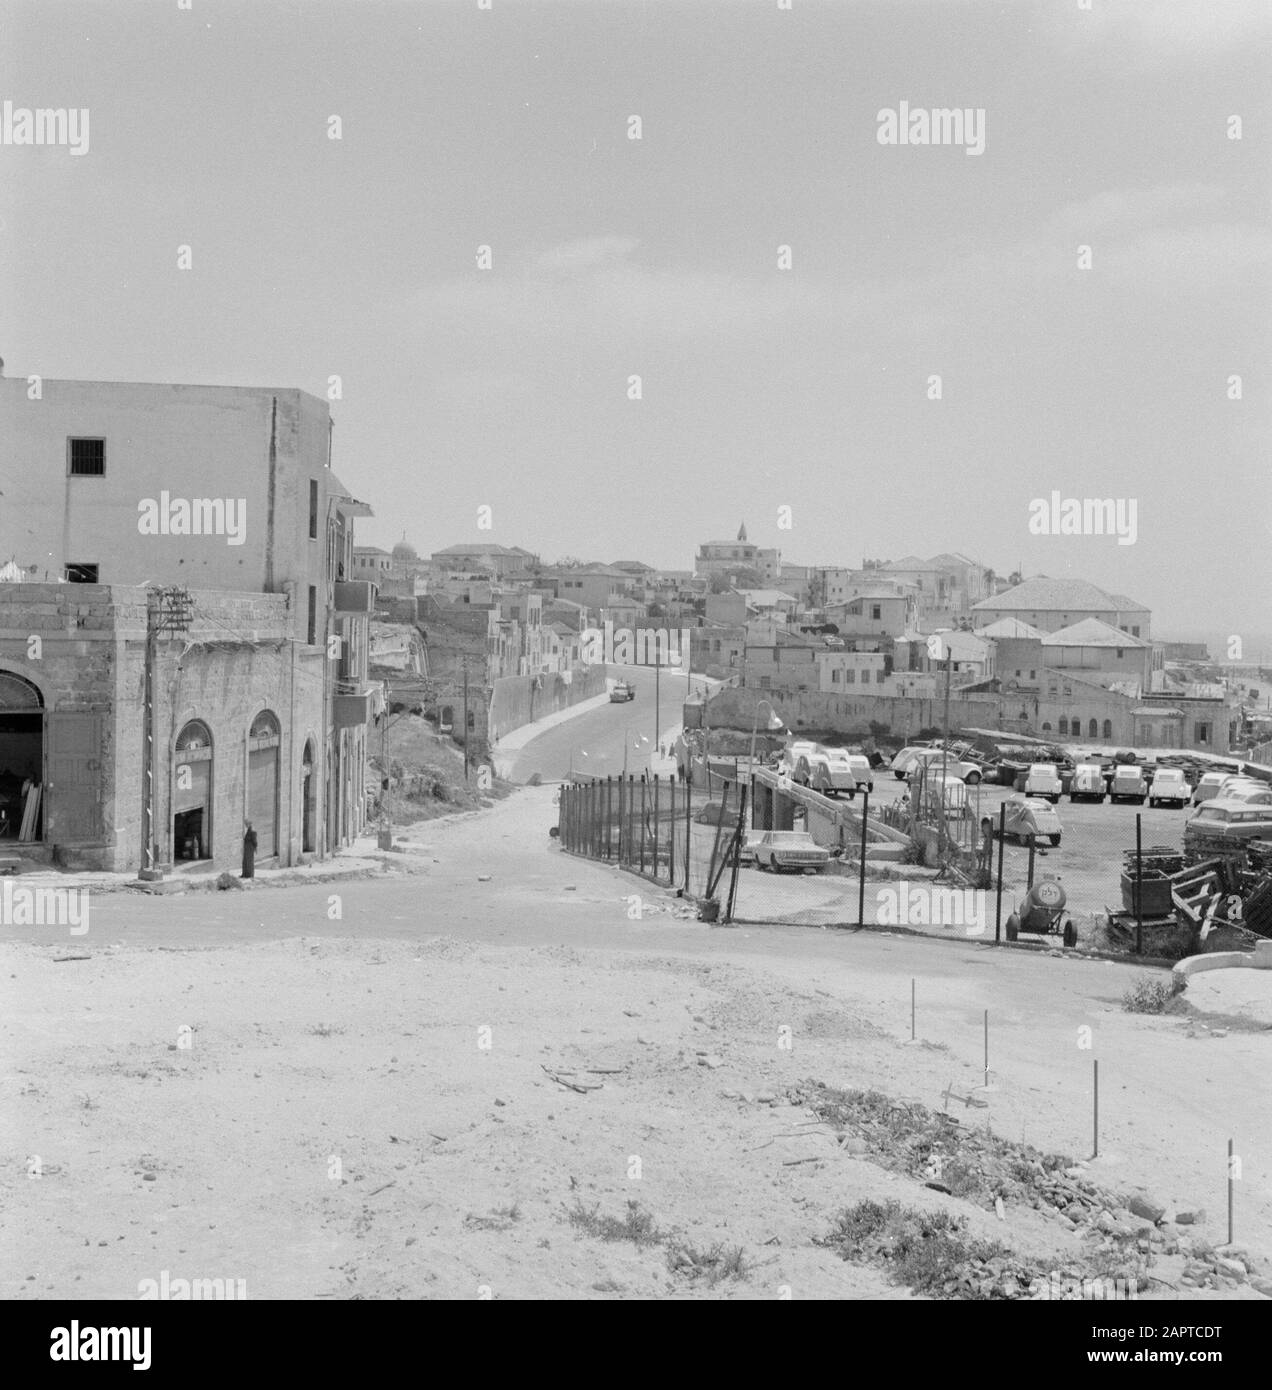 Israel: Jaffa (Tel Aviv)  View of the village with front right a parking space for deux-chevaux (Citroën 2CV, 'ugly duck') Annotation: Jaffa is now a city district of Tel Aviv Date: 1964-1965 d Location: Israel, Jaffa, Tel Aviv Keywords: cars, villages, panoramas, parking lots Stock Photo